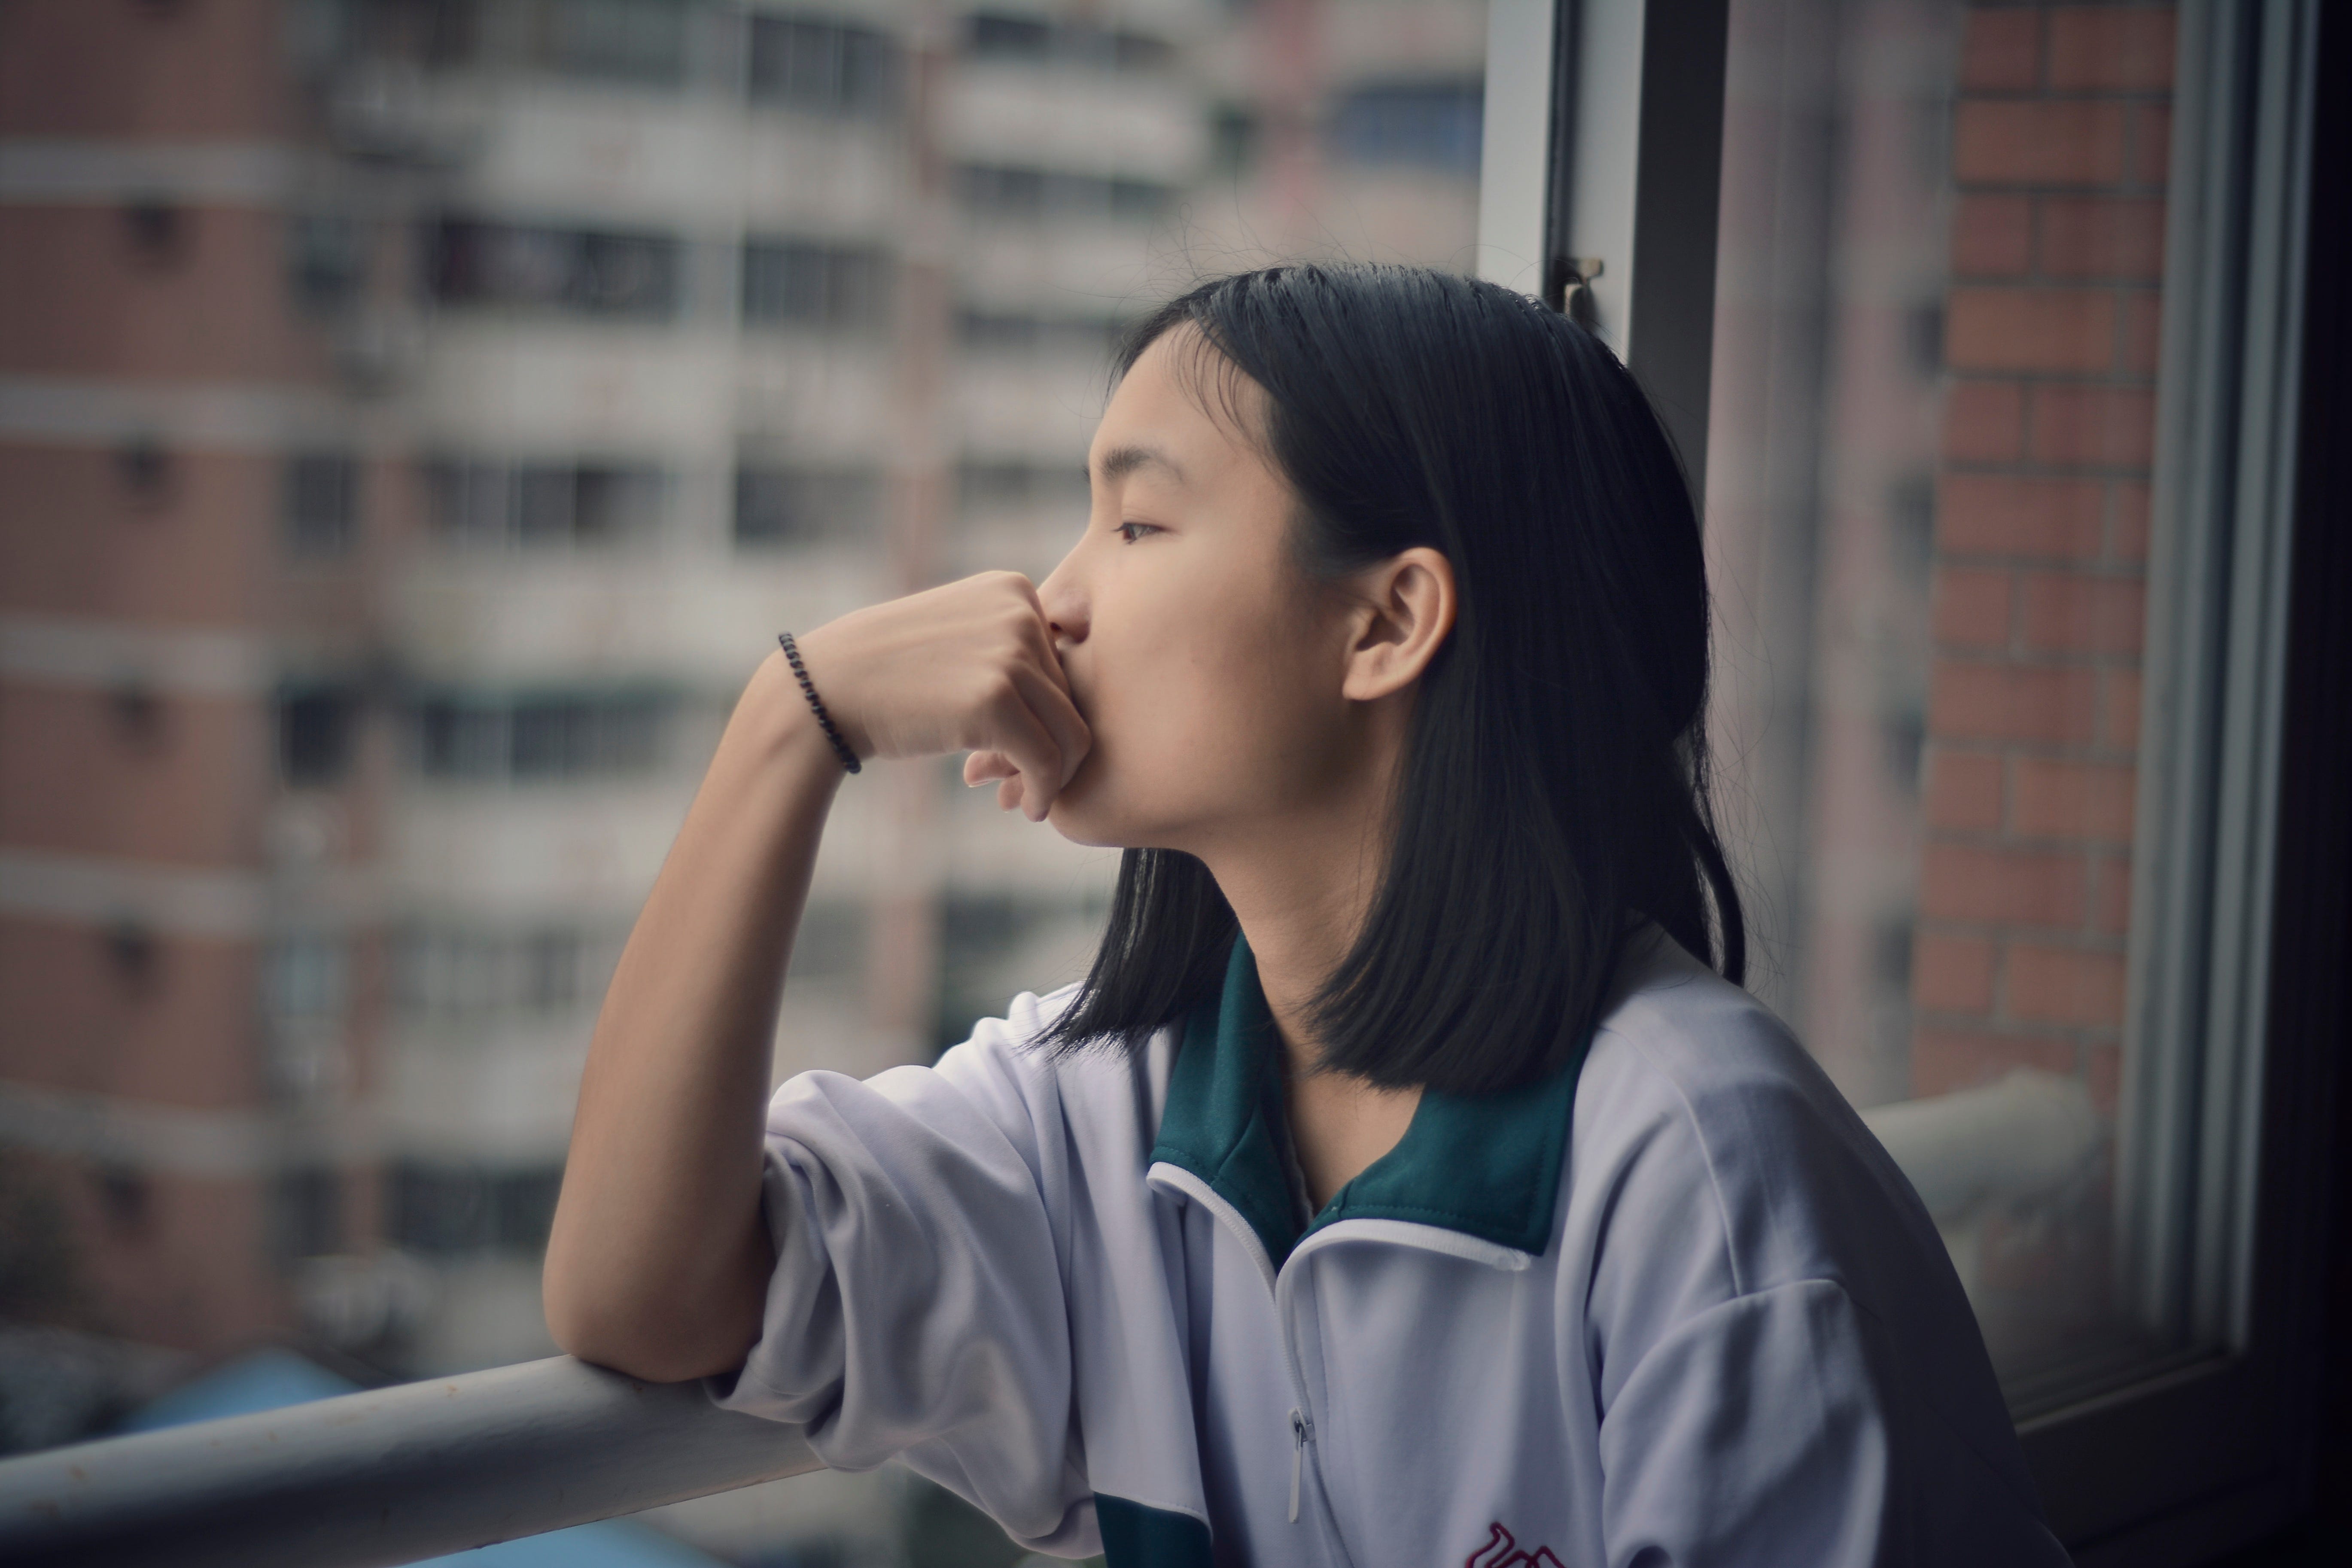 A young woman leans on a railing, with her hand next to her face, as she looks out the window in deep thought.